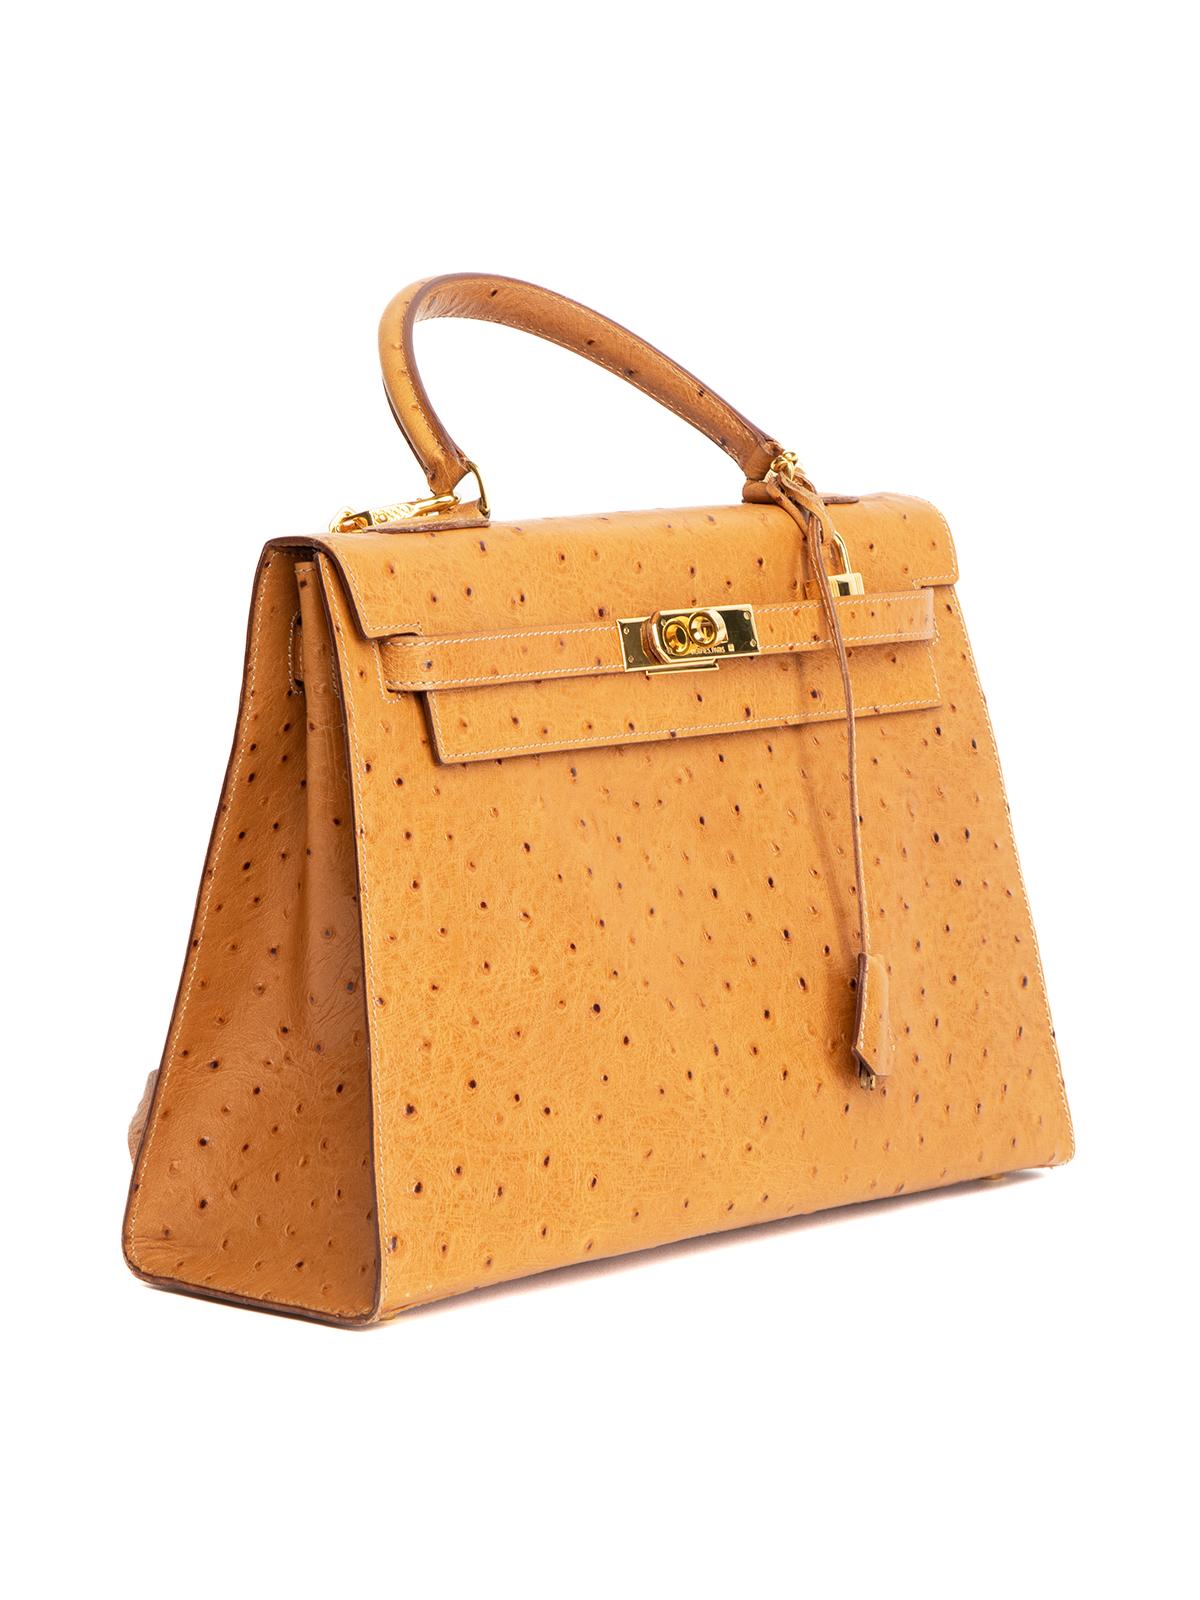 CONDITION is Very good. Minimal wear to bag is evident. Minimal wear to interior of bag on this used Hermes designer resale item. Details Colour - beige/brown Material - ostrich leather Handles x 2 Hardware - gold tone metal Fastening - turn lock